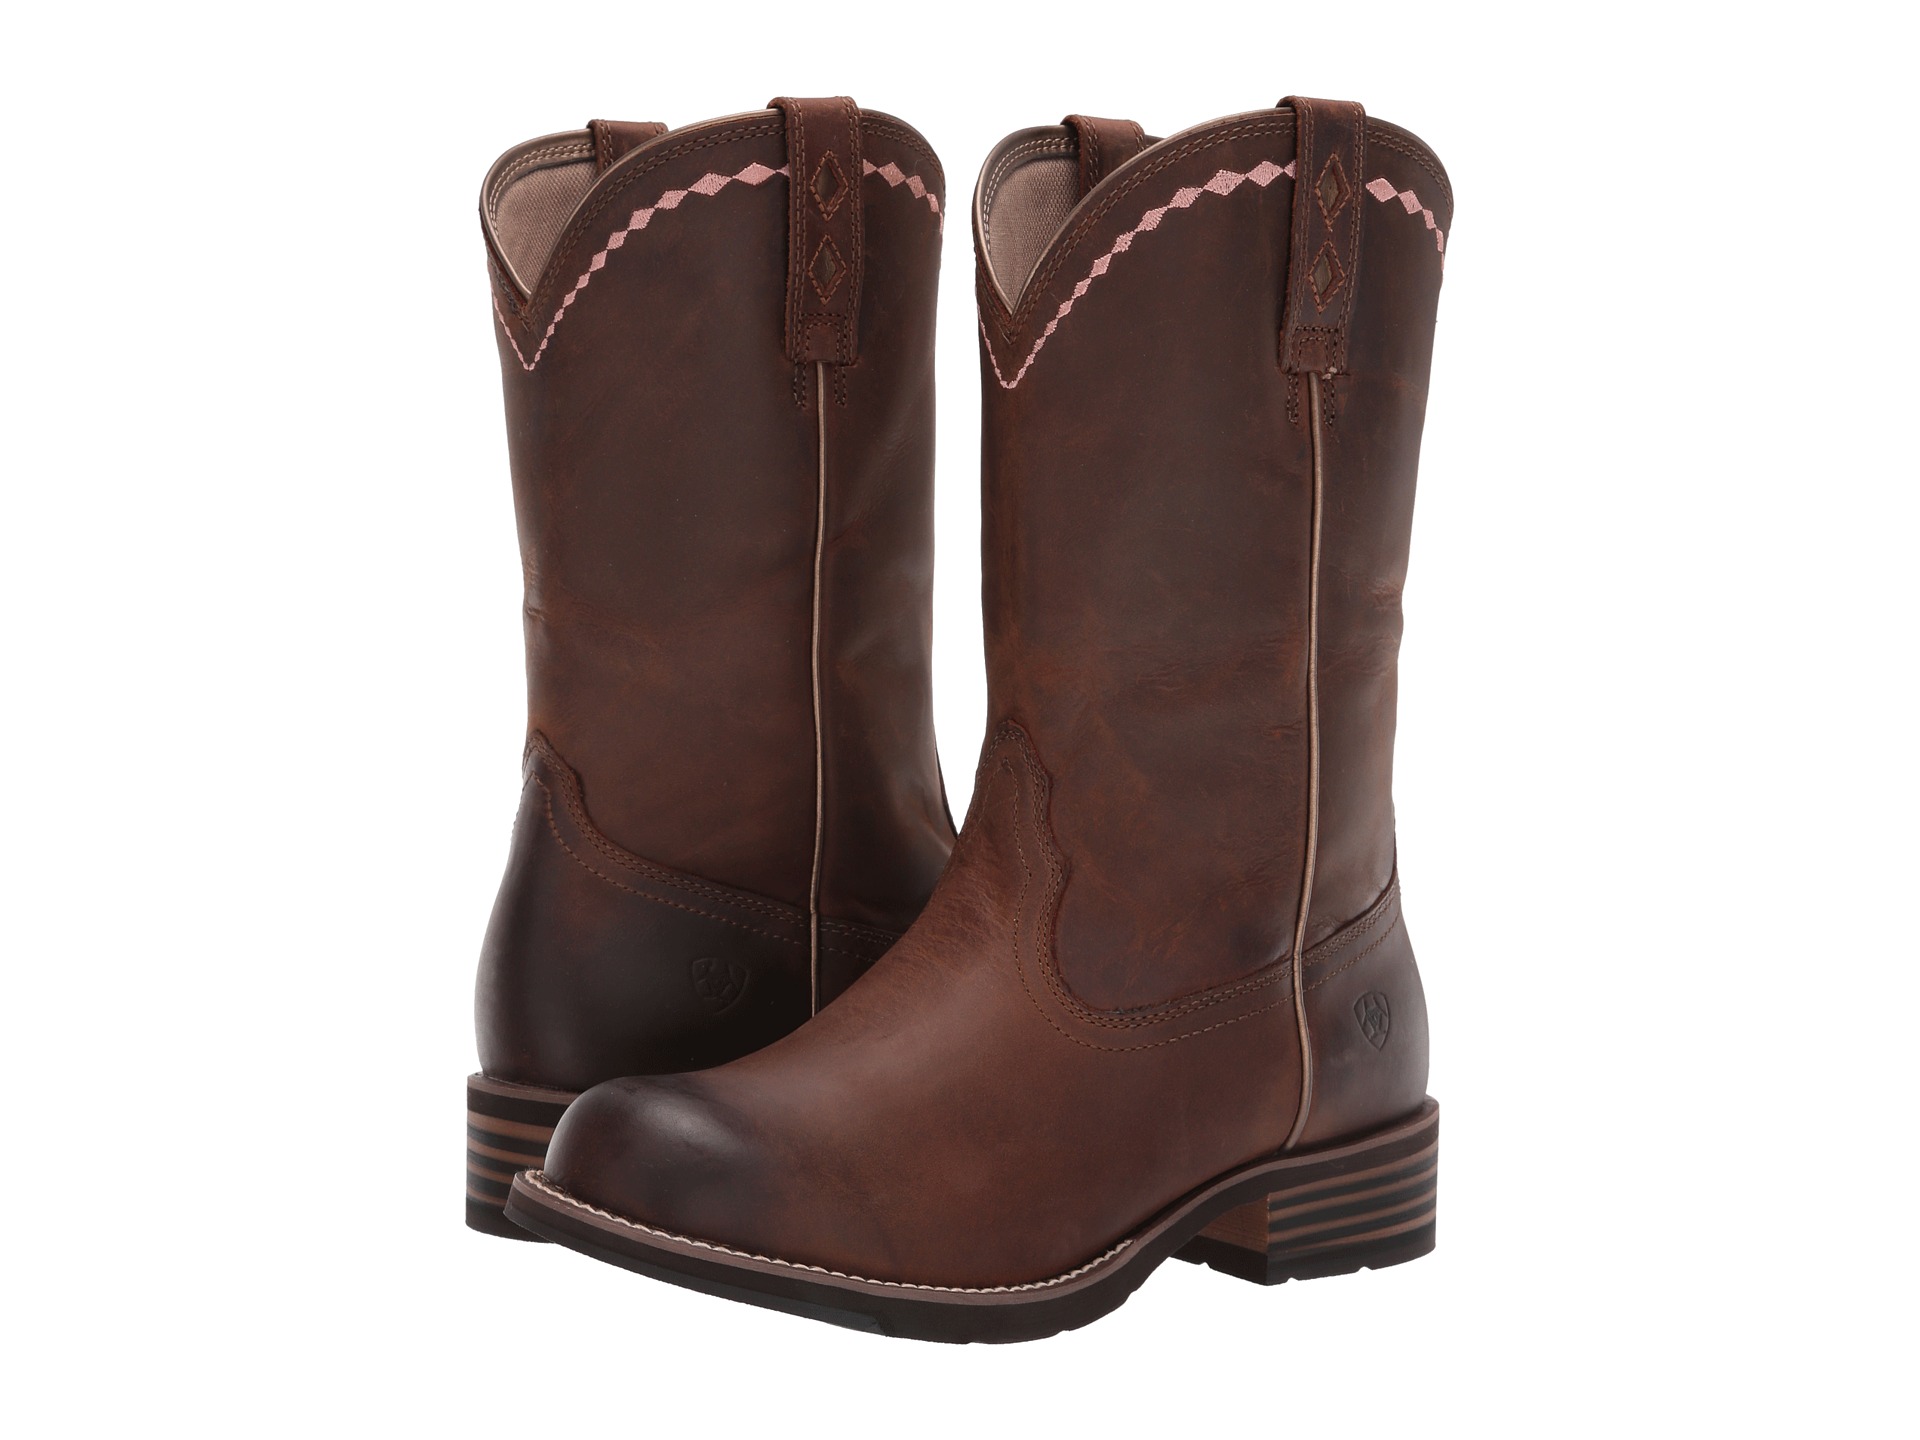 Ariat Unbridled Roper at Zappos.com